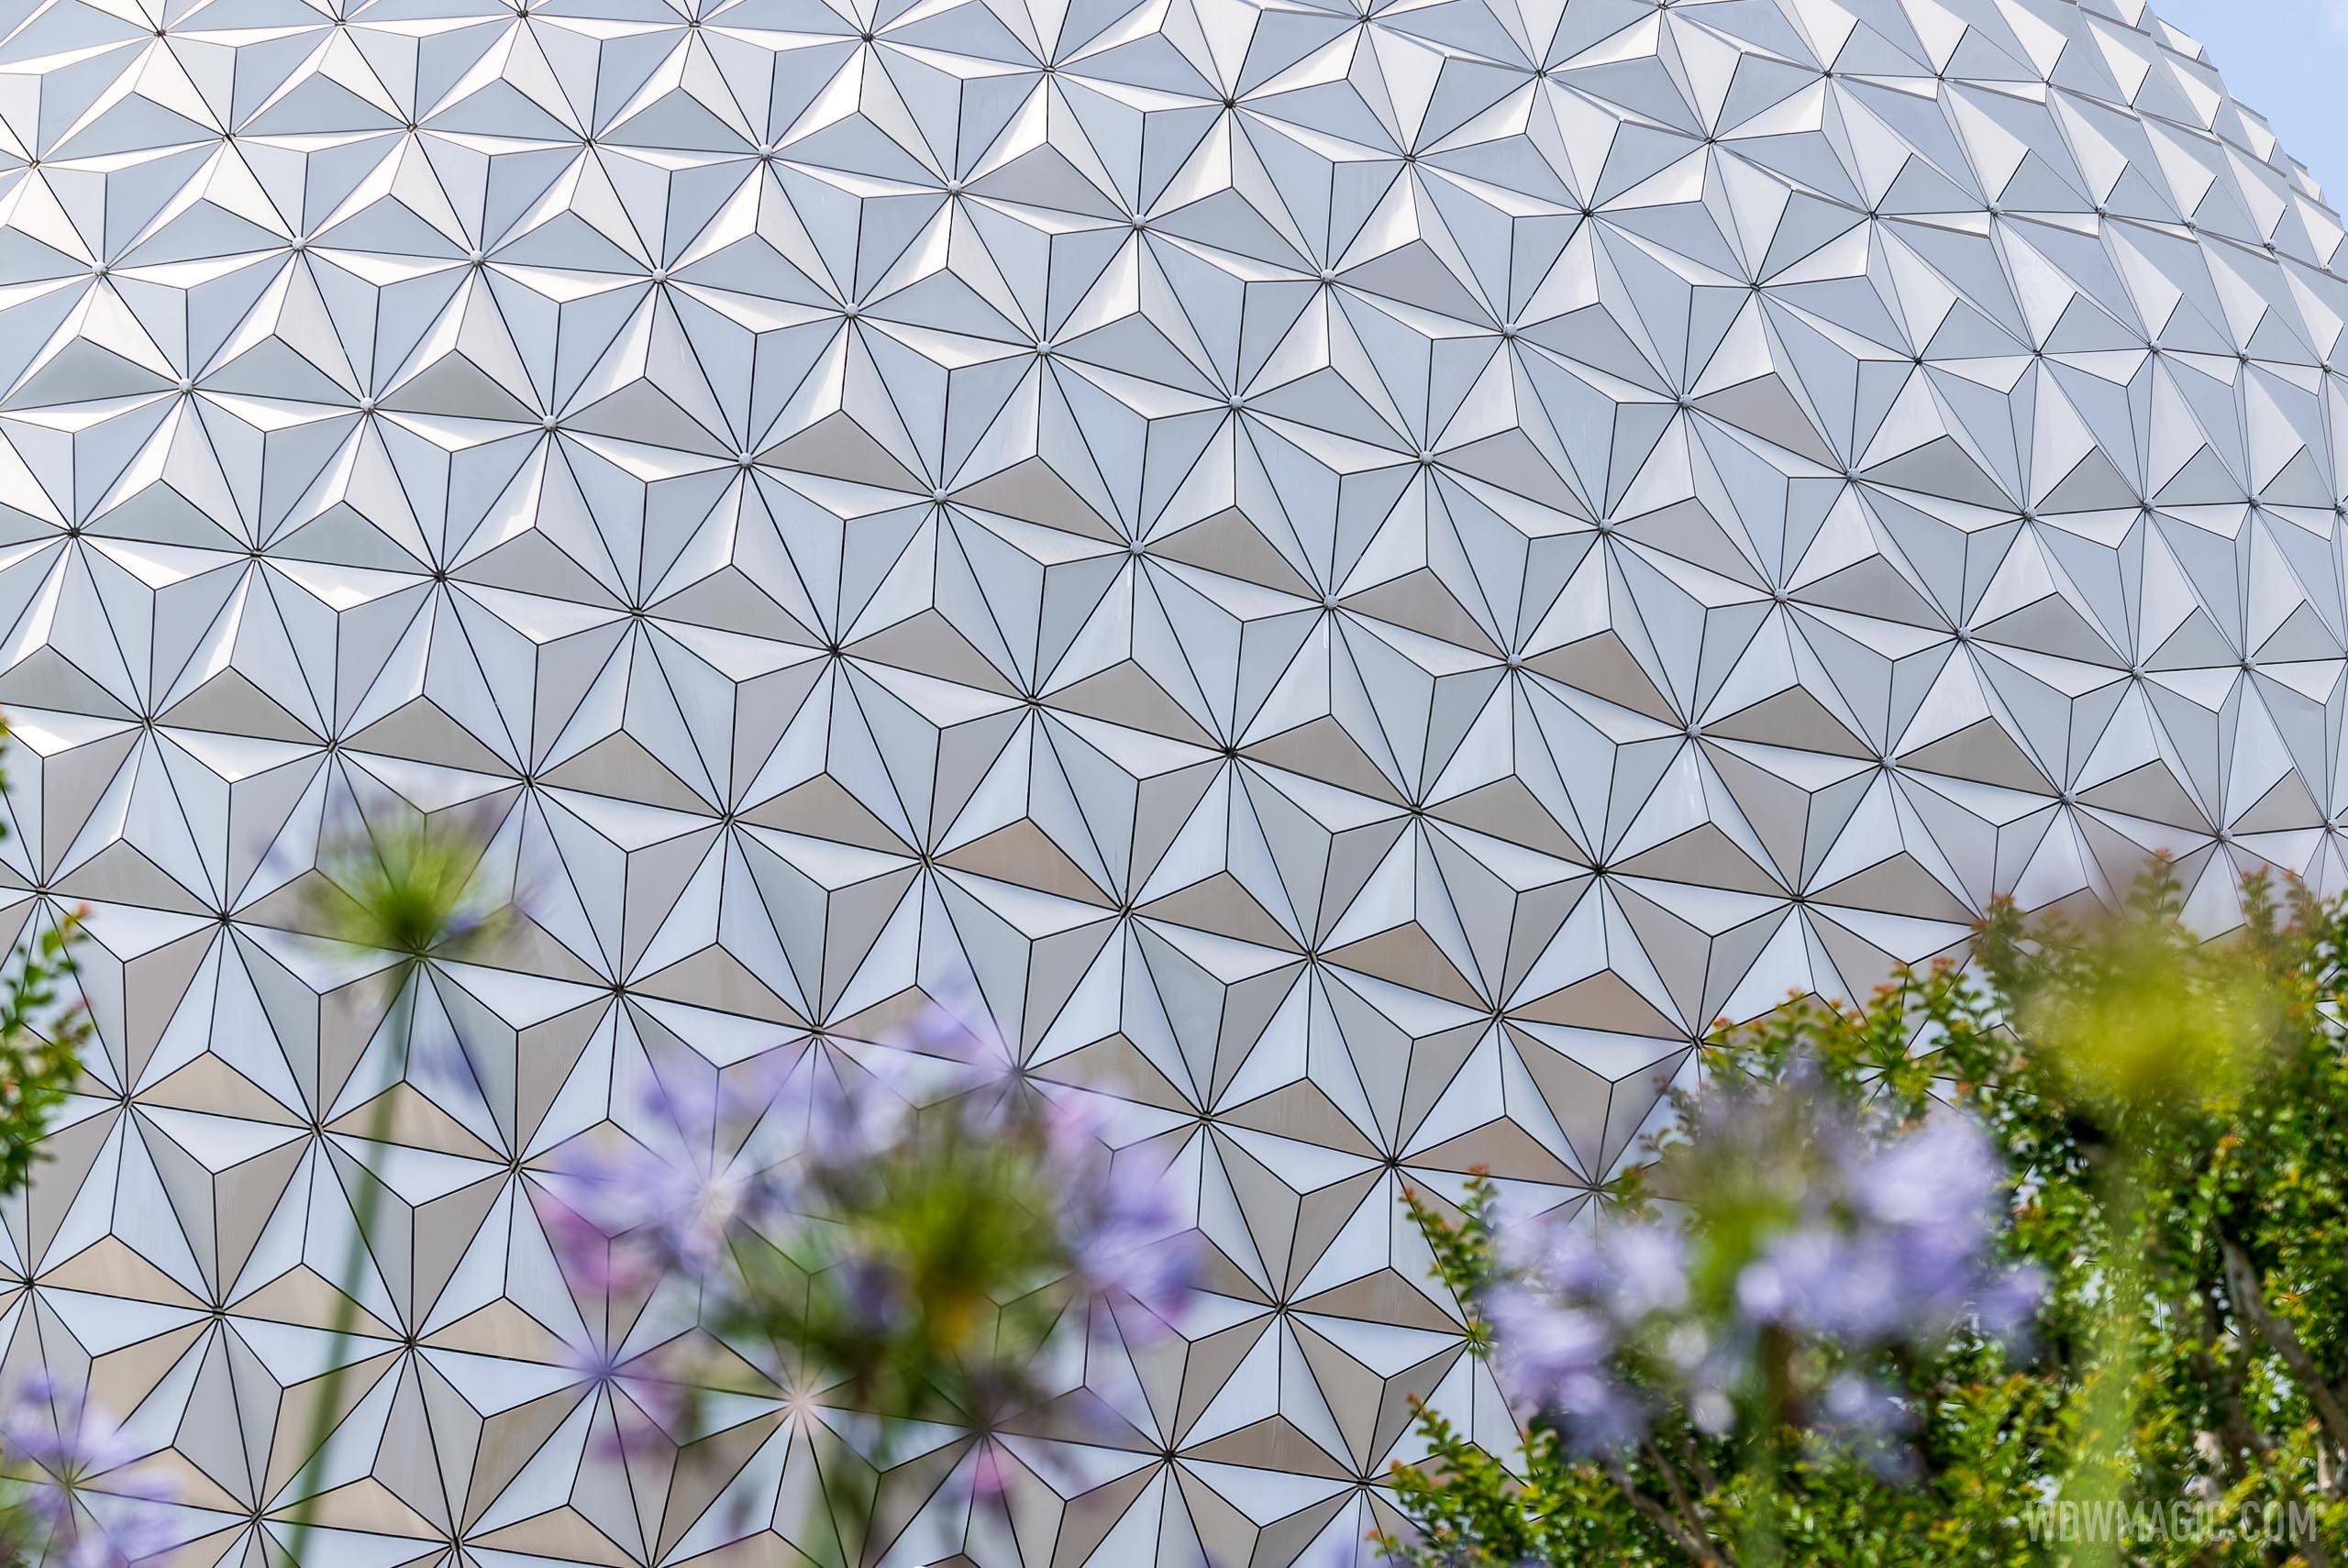 'Points of Light' at EPCOT now wrap nearly all the way around Spaceship Earth